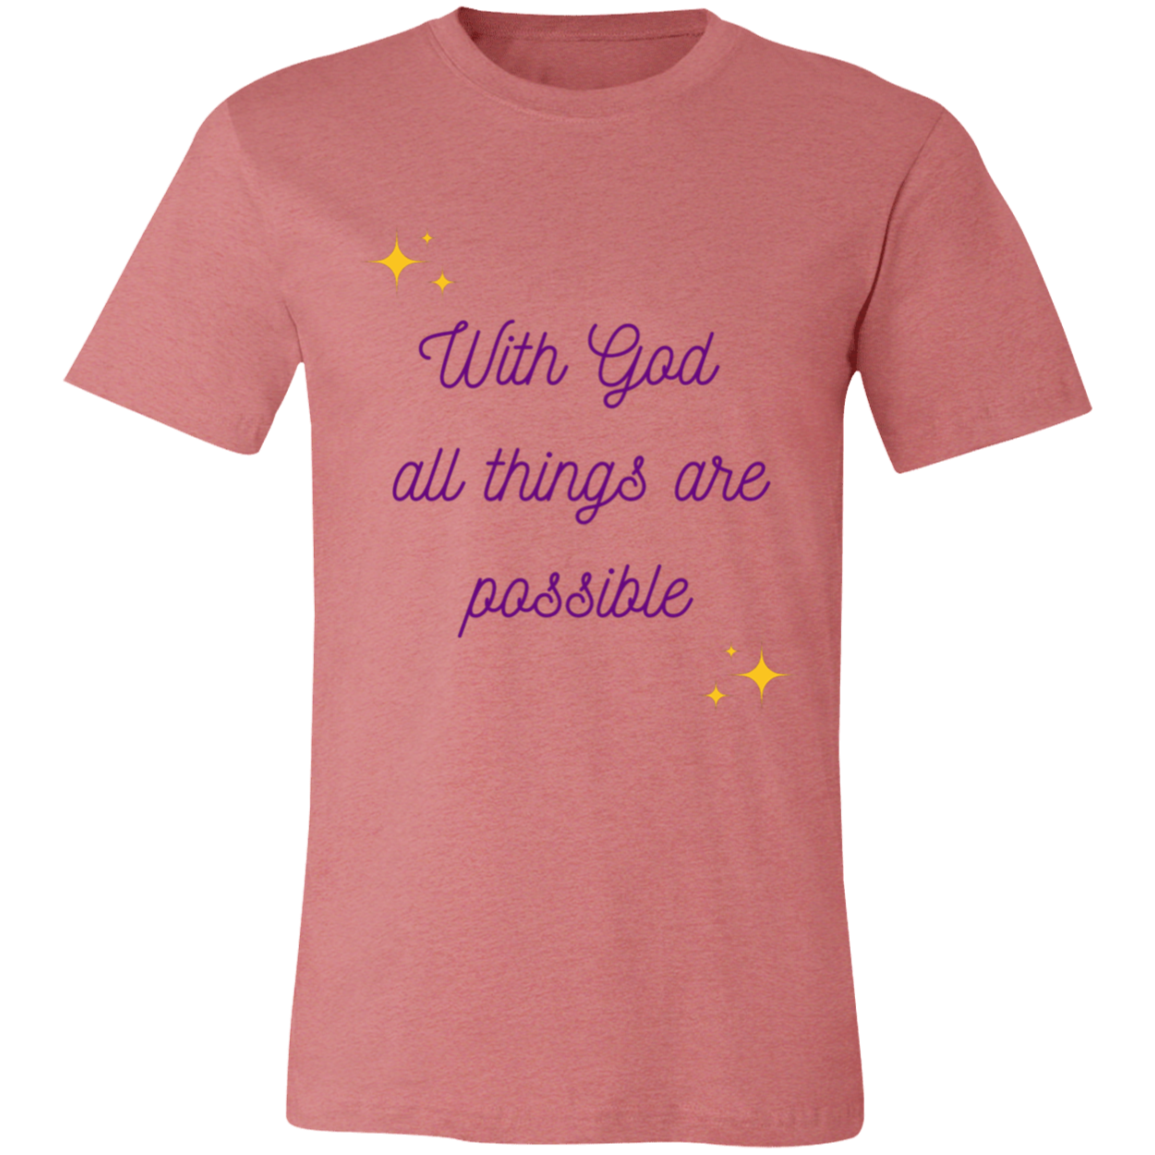 All Things Are Possible - Jersey Short-Sleeve T-Shirt